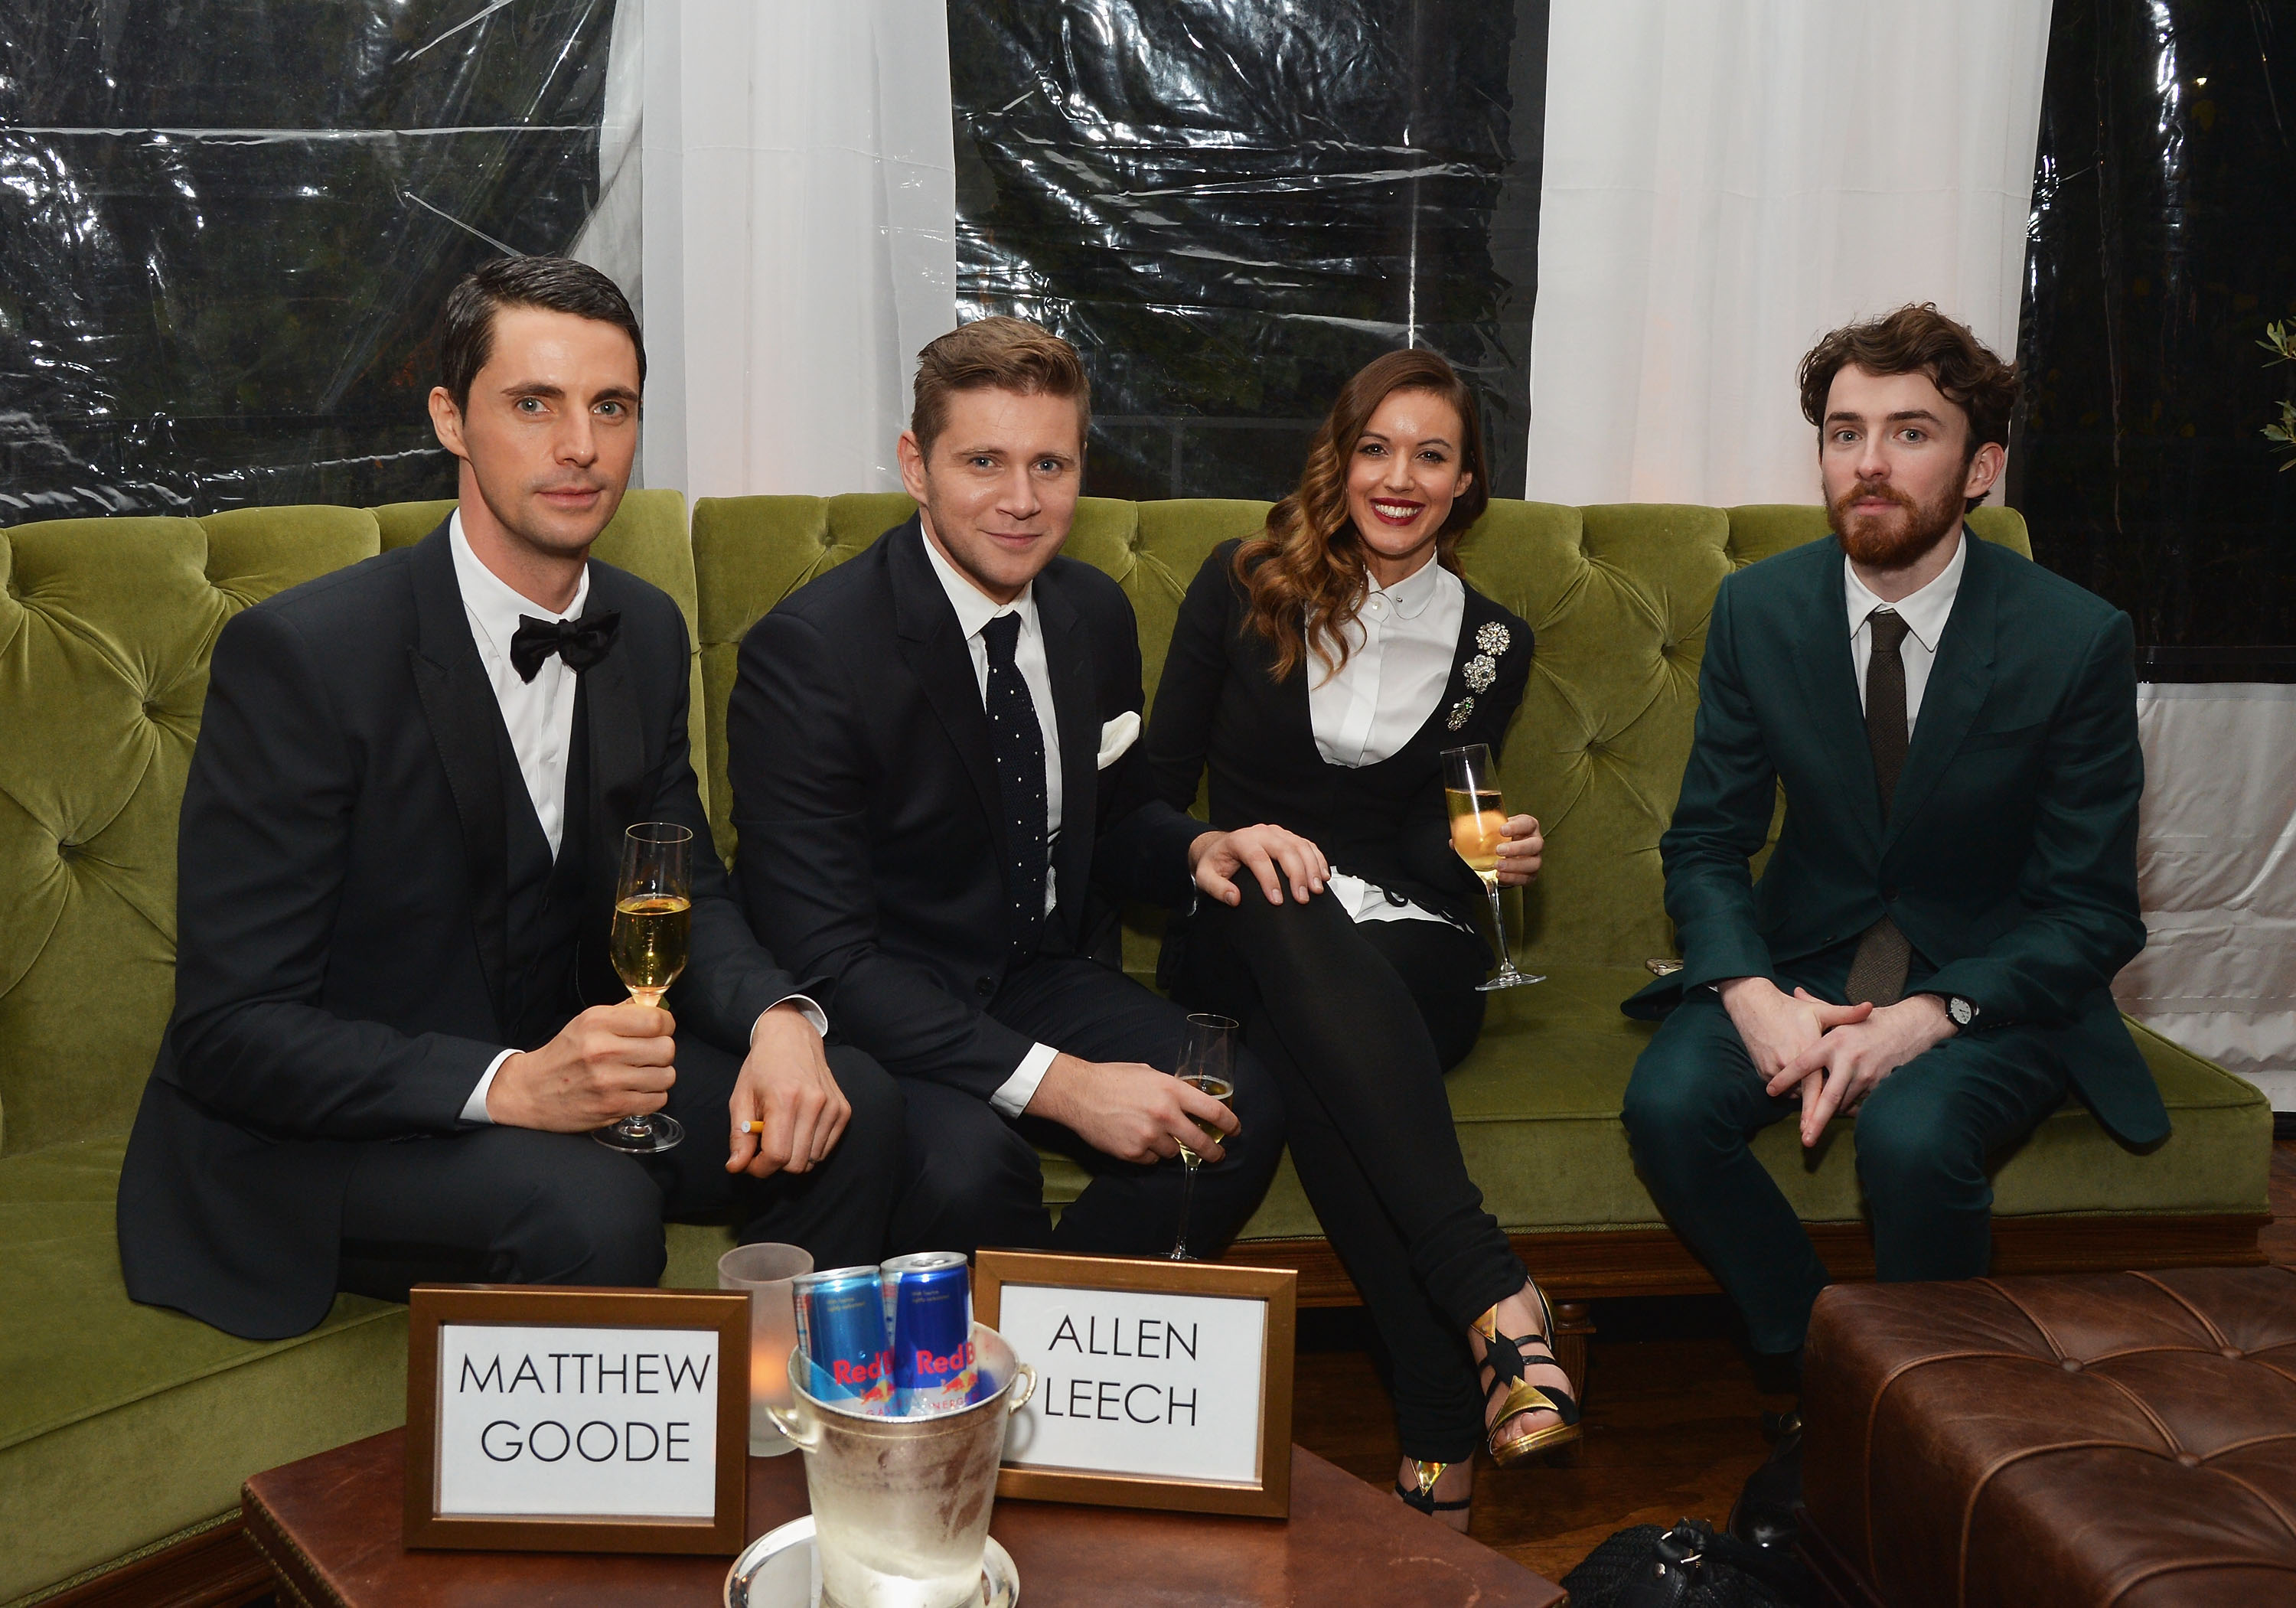 Actors Matthew Goode, Allen Leech, television presenter Charlie Webster and actor Matthew Beard - After Party For Premiere Of The Imitation Game, Hosted By Weinstein Company 